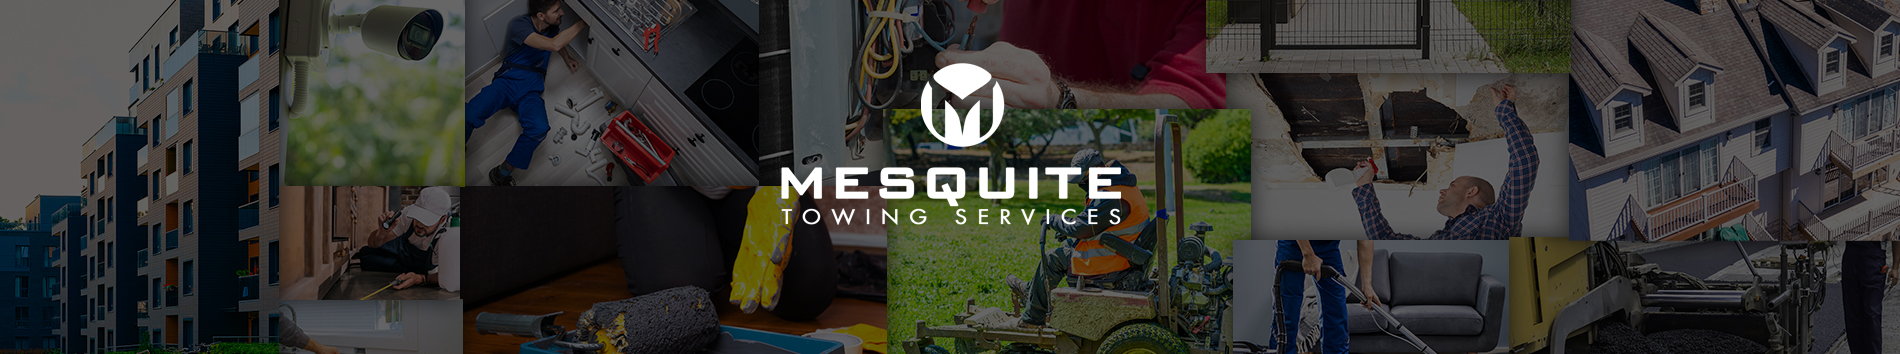 Mesquite Towing